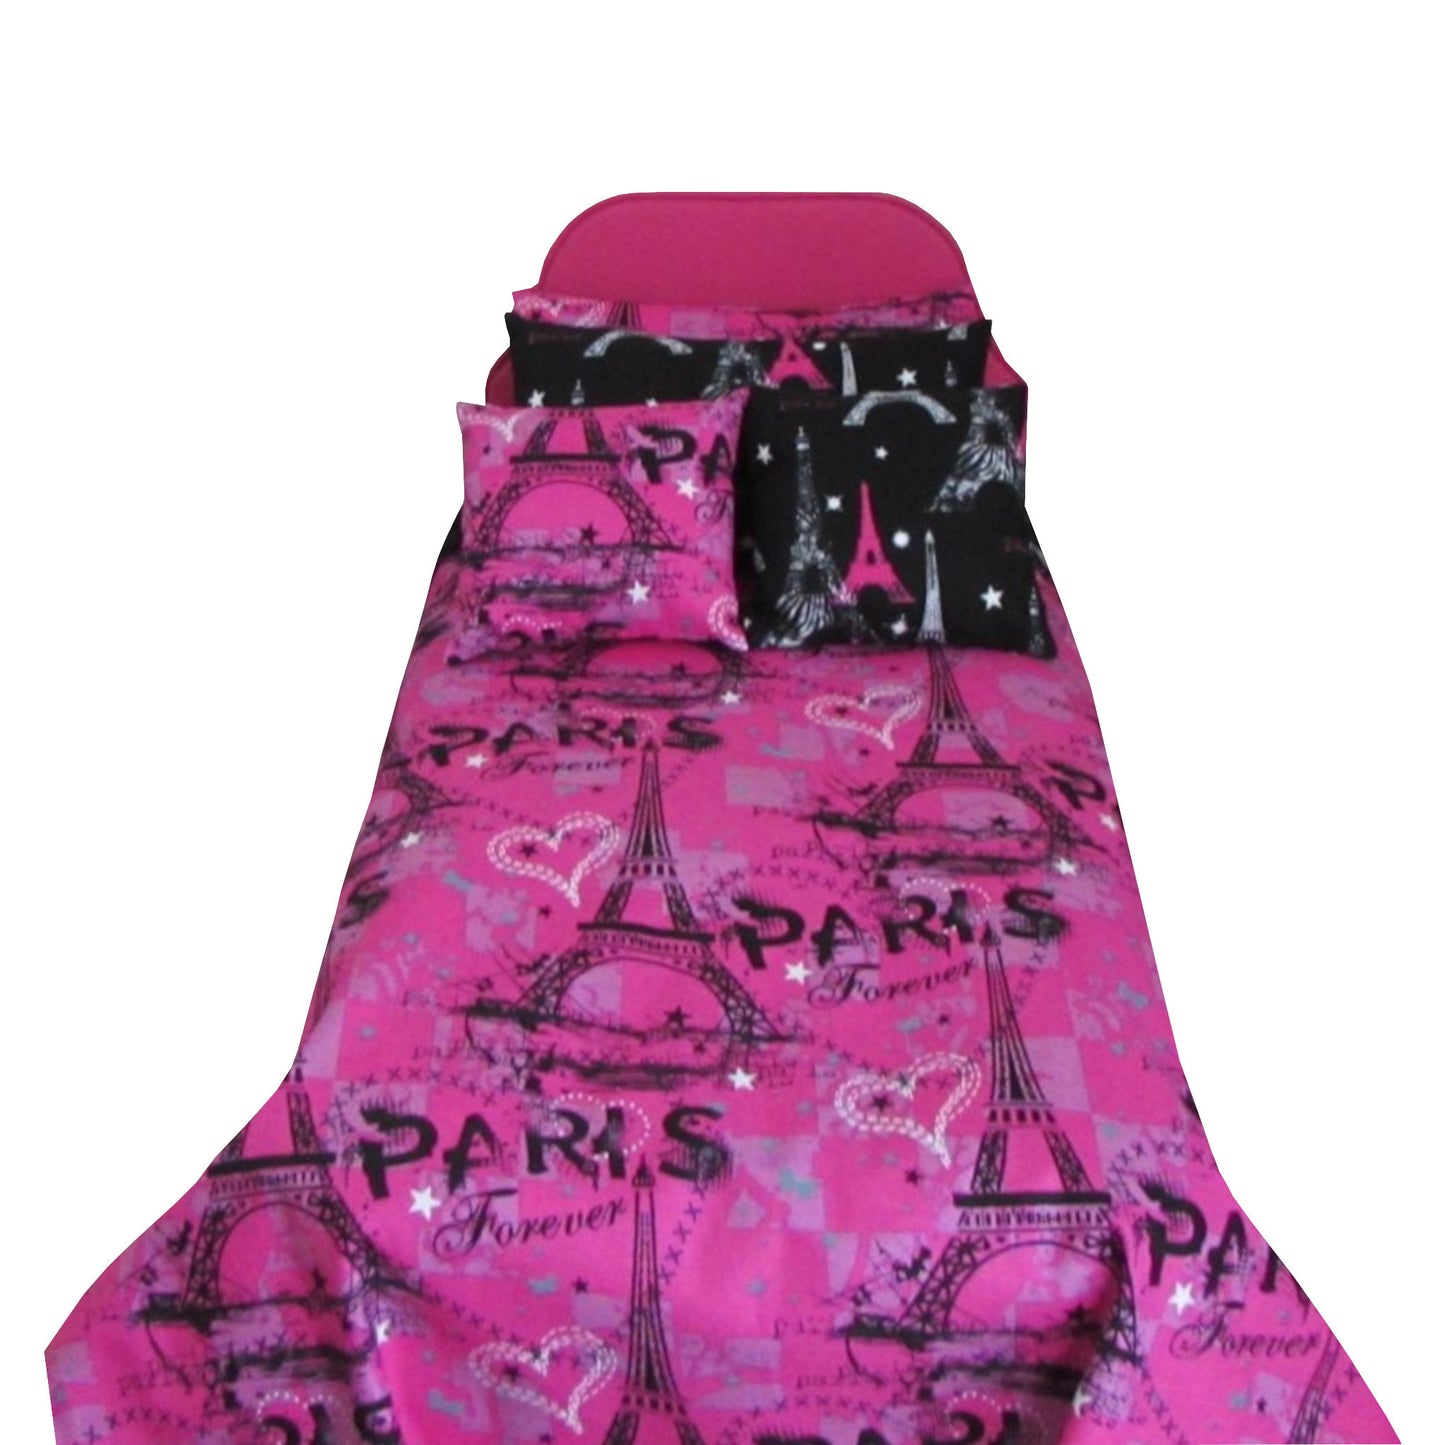 Bright Pink Doll Bed and Pink Paris Doll Bedding for 18-inch dolls